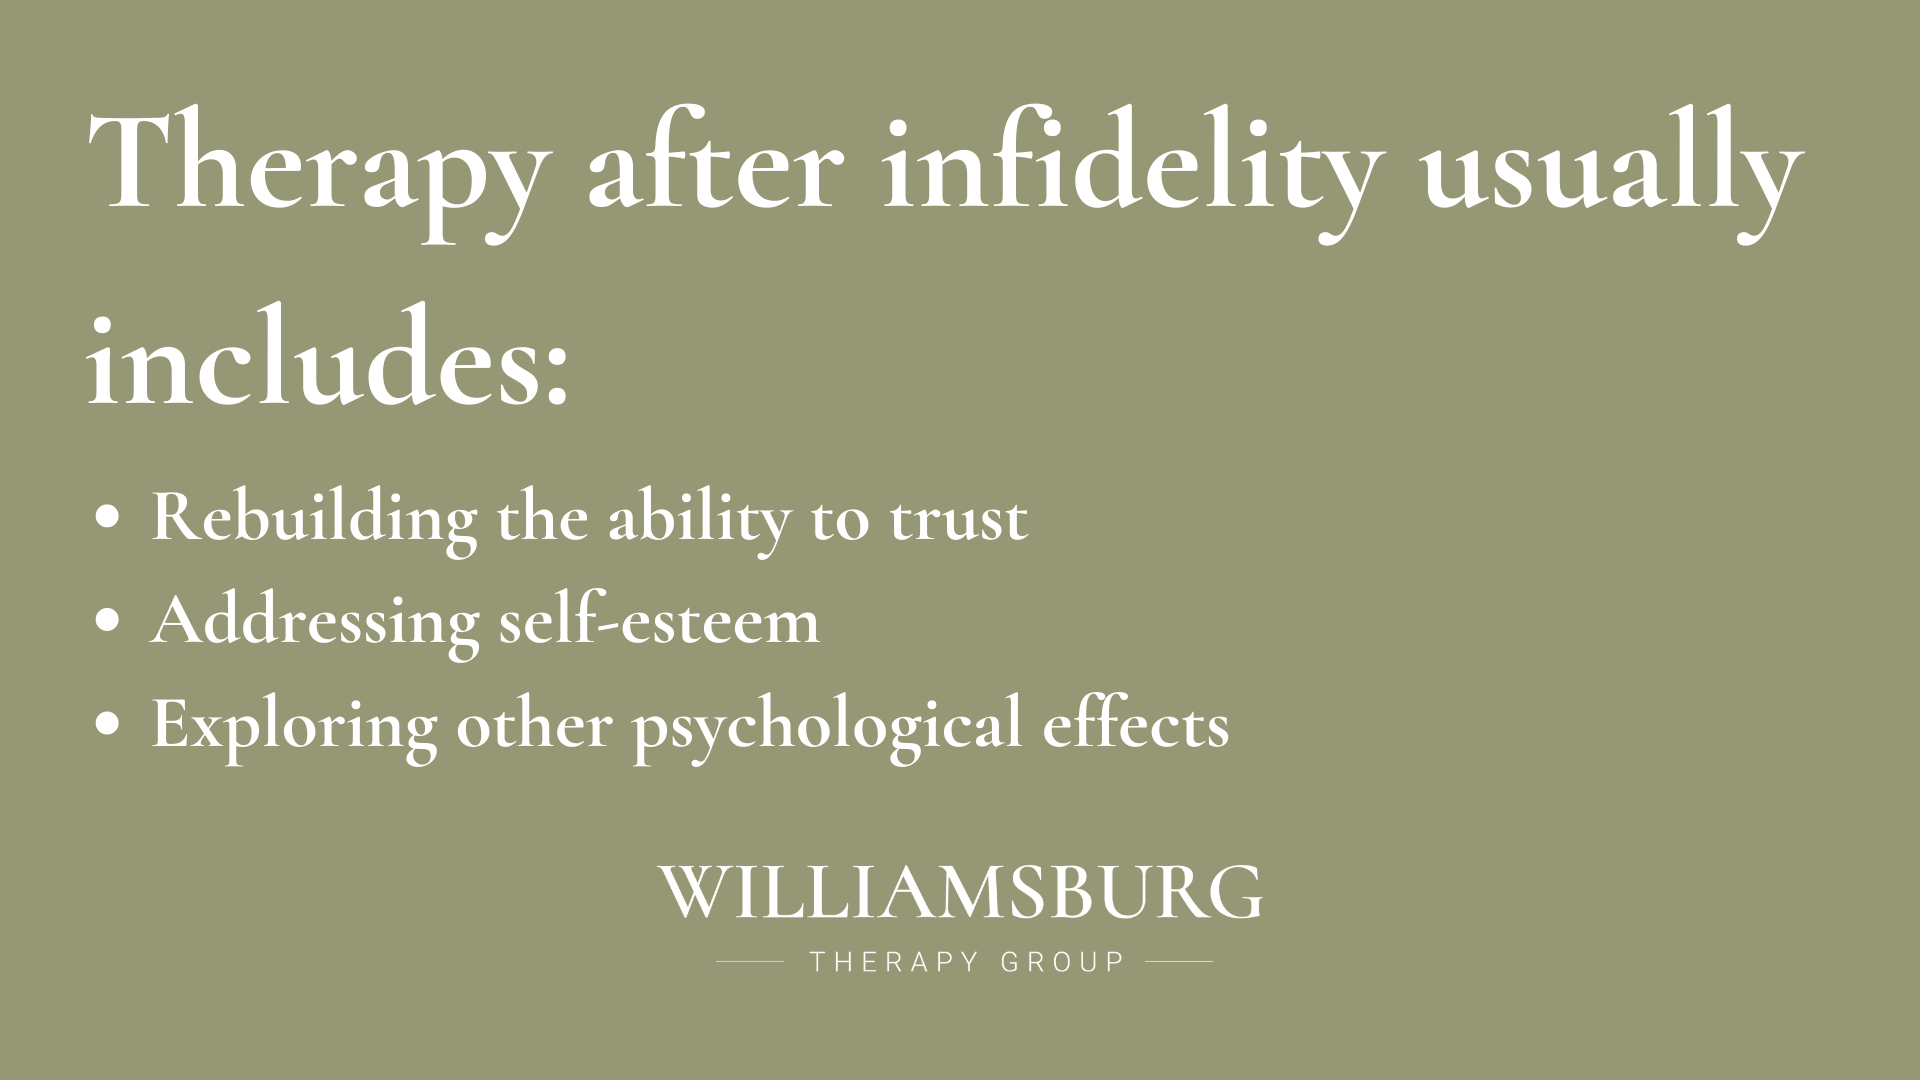 Therapy after infidelity usually includes